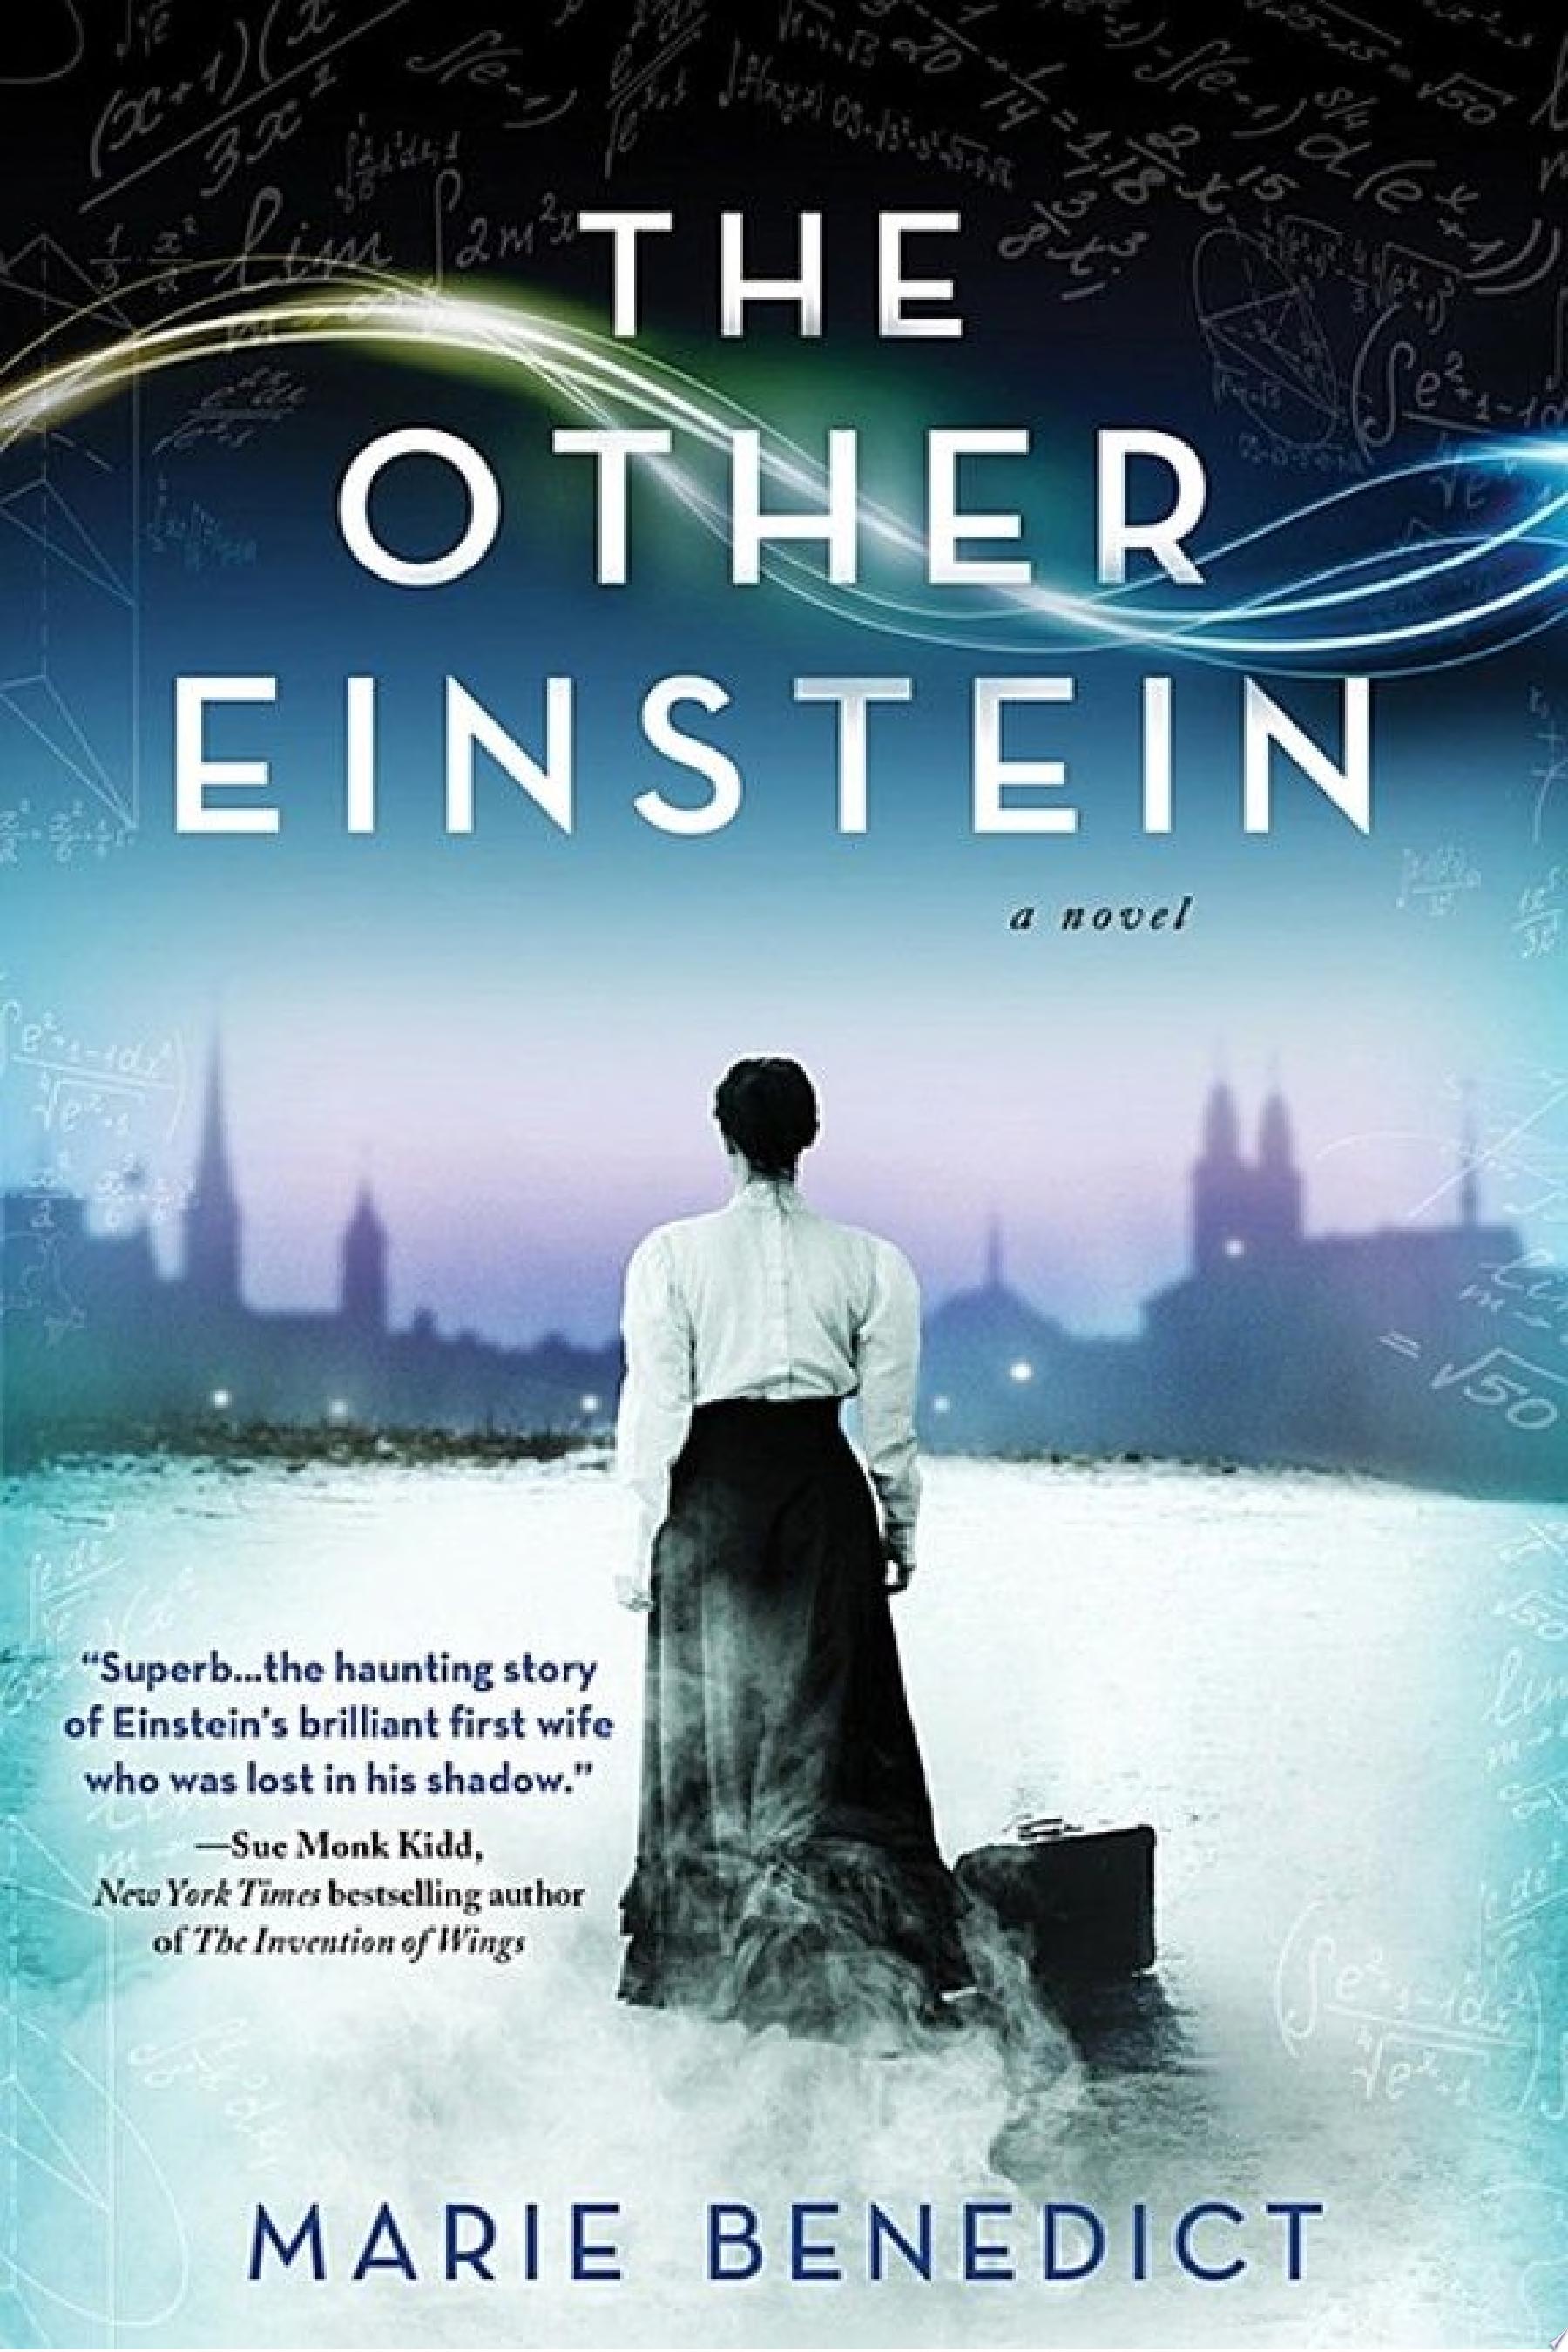 Image for "The Other Einstein"